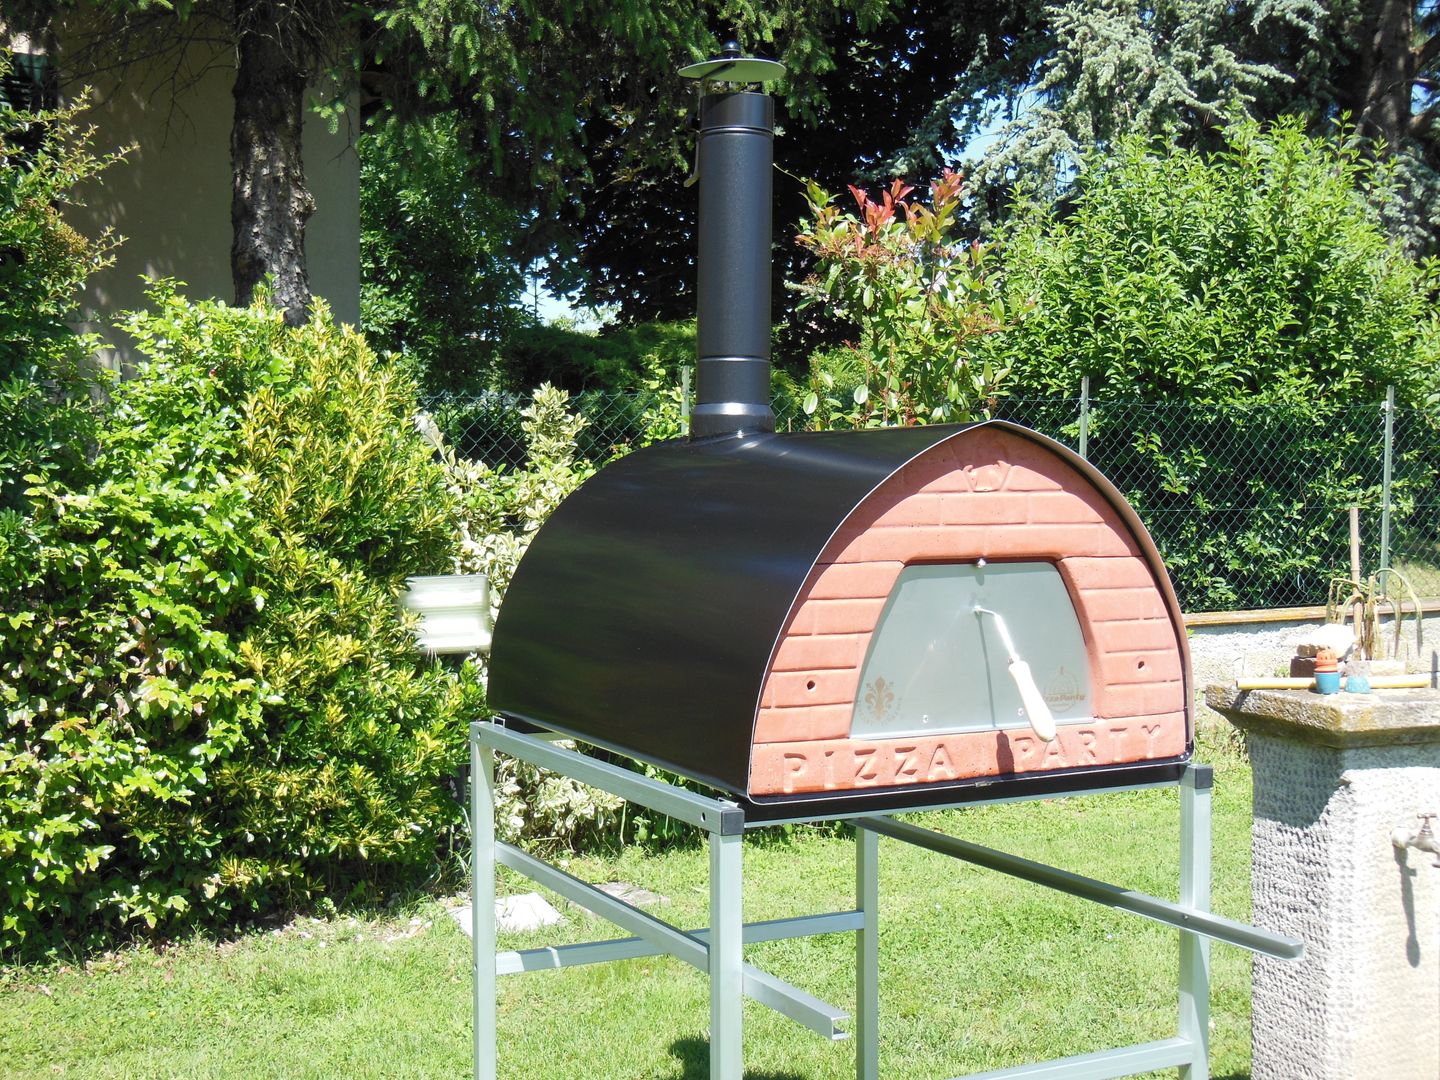 Wood fired pizza oven Pizzone by Pizza Party Genotema SRL Unipersonale Сад в рустикальном стиле Грильницы